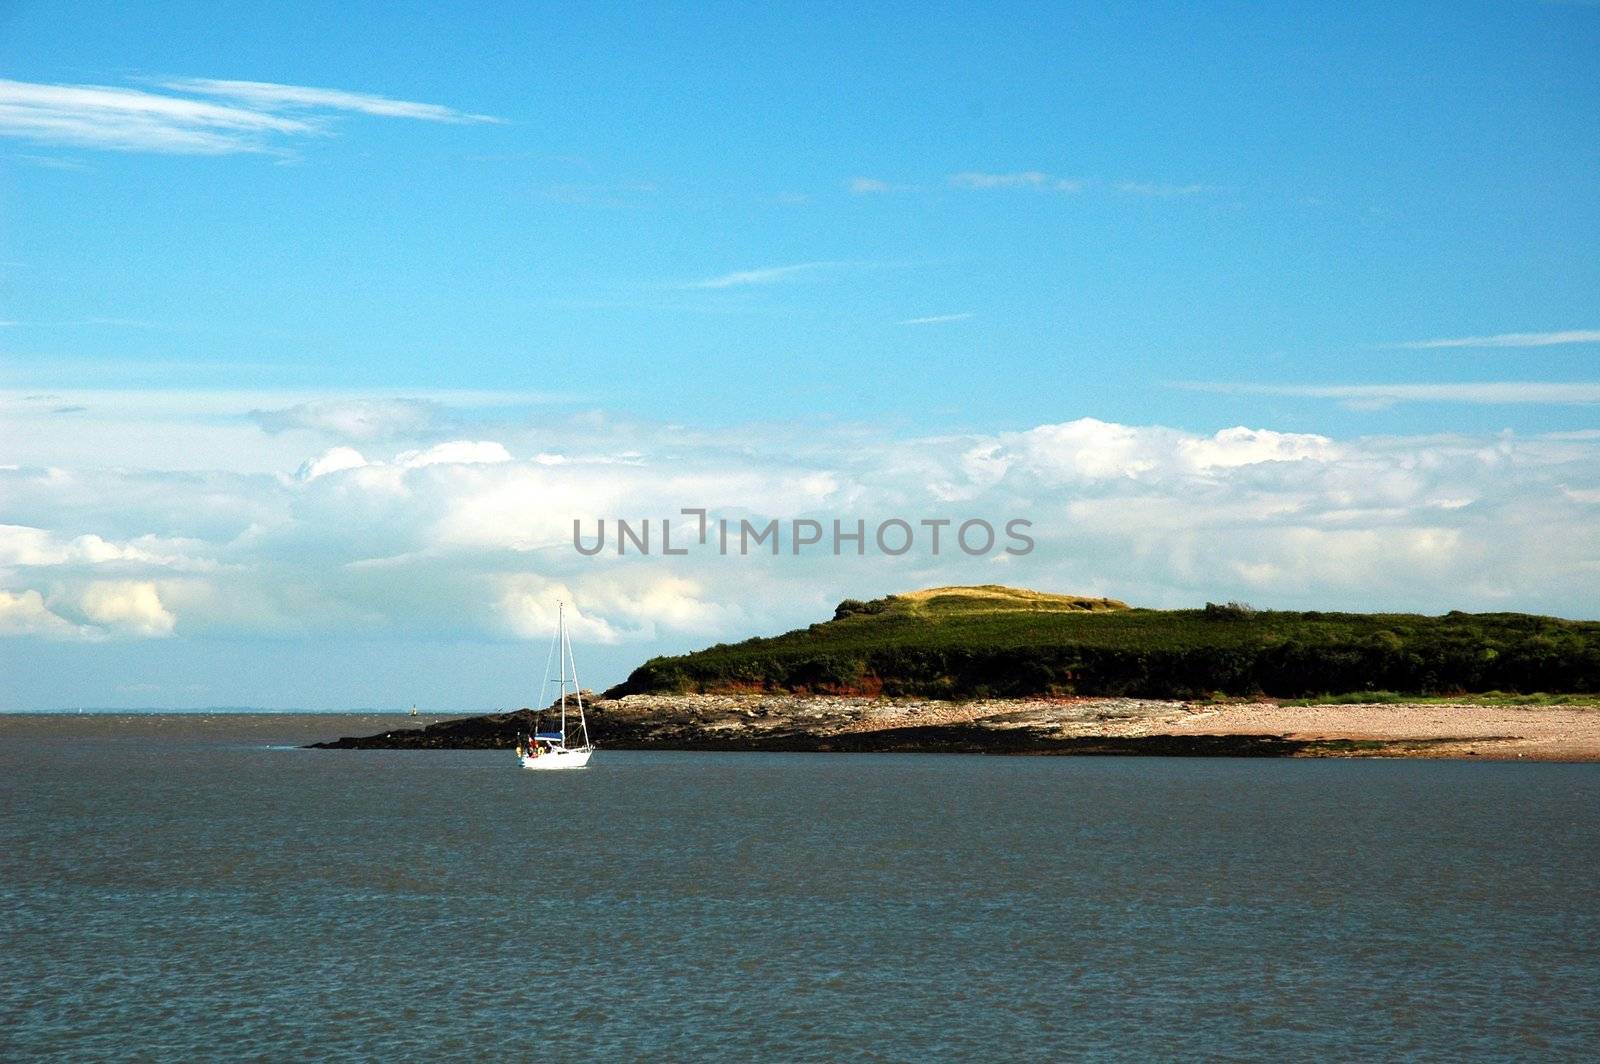 sully island and sea,  horizontally framed picture with boat